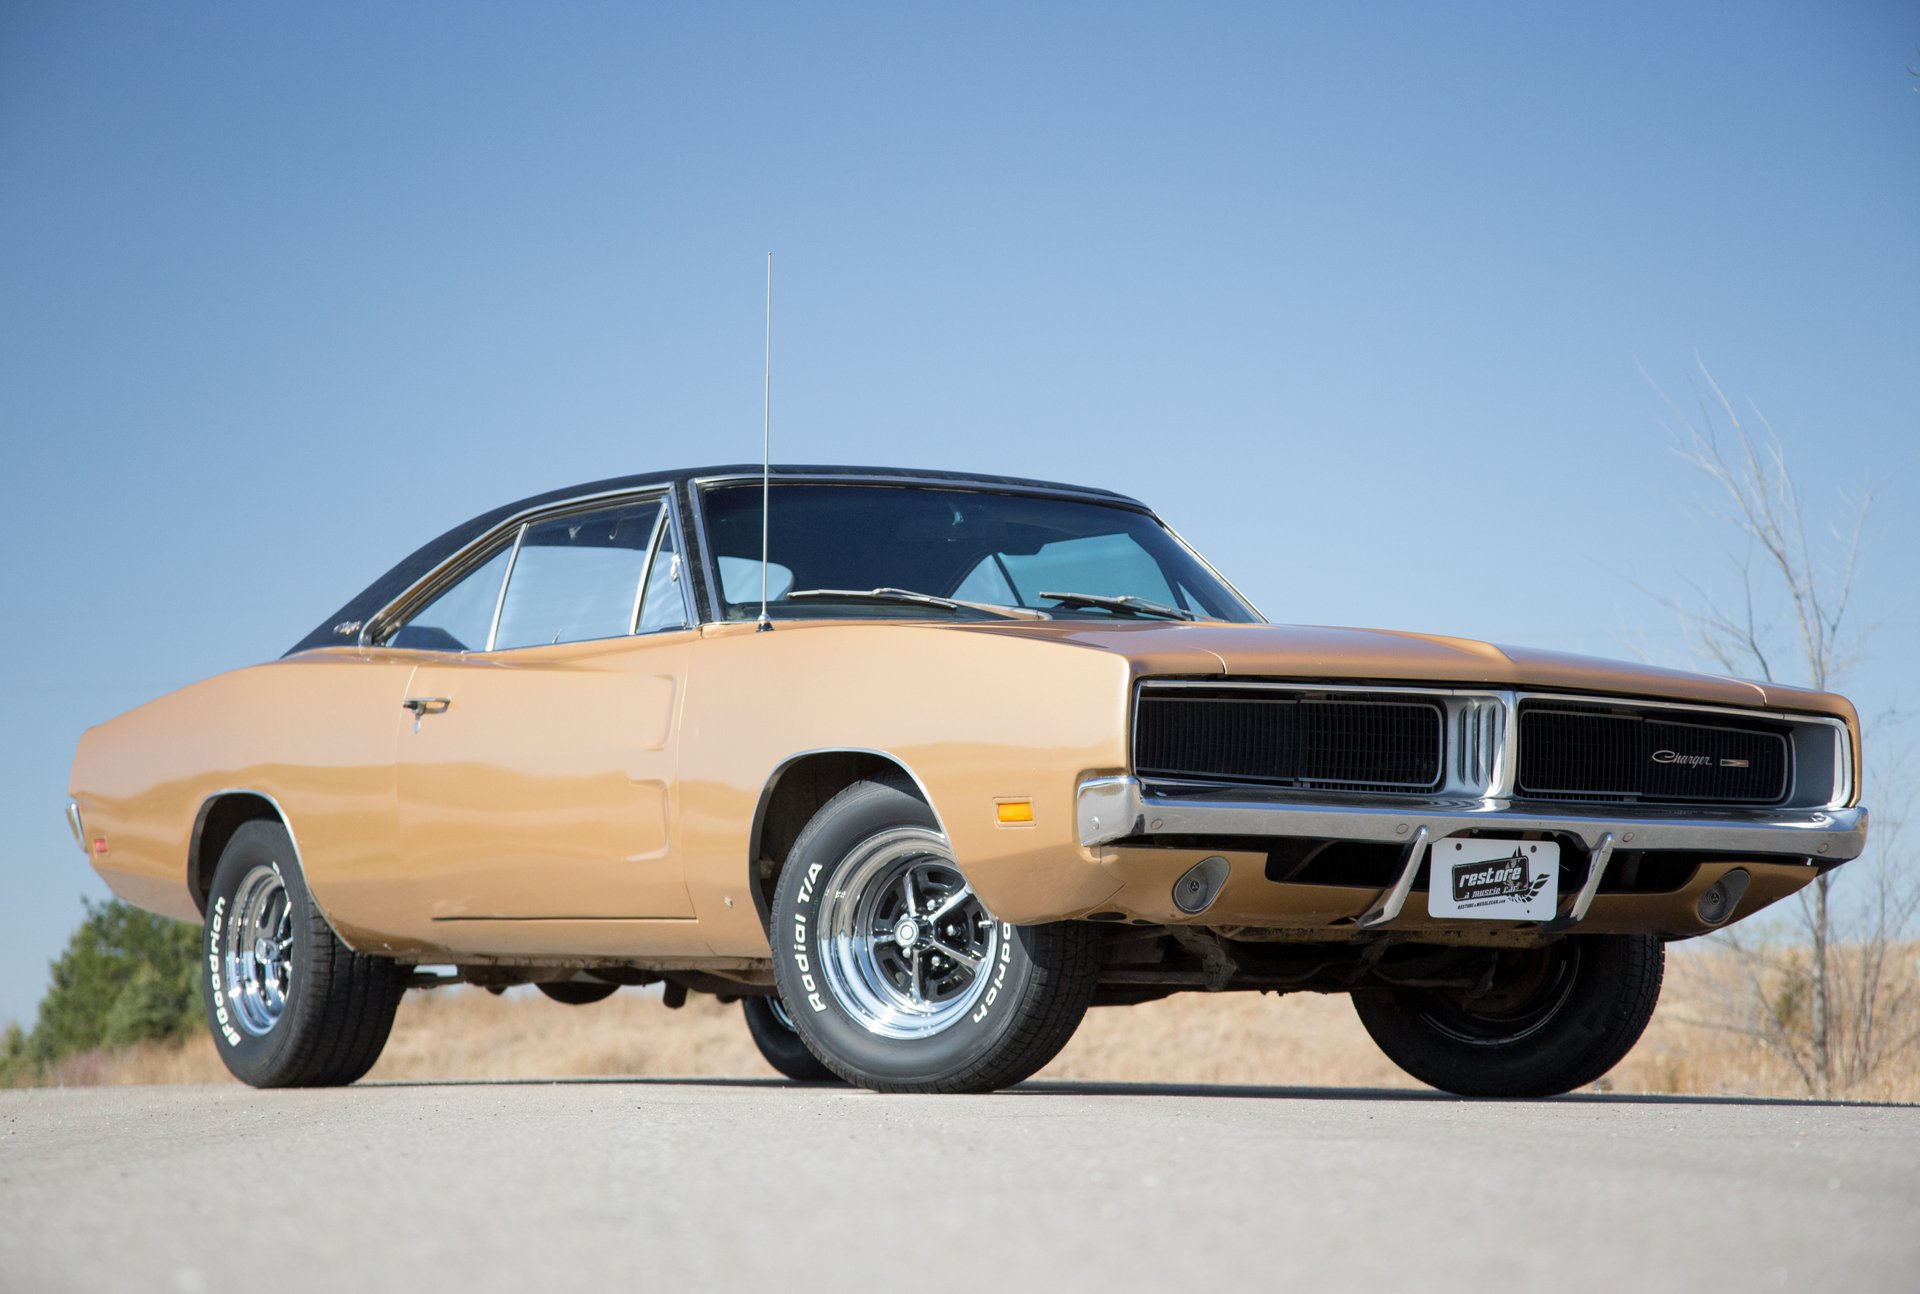 1969 Dodge Charger | Restore A Muscle Car™ LLC